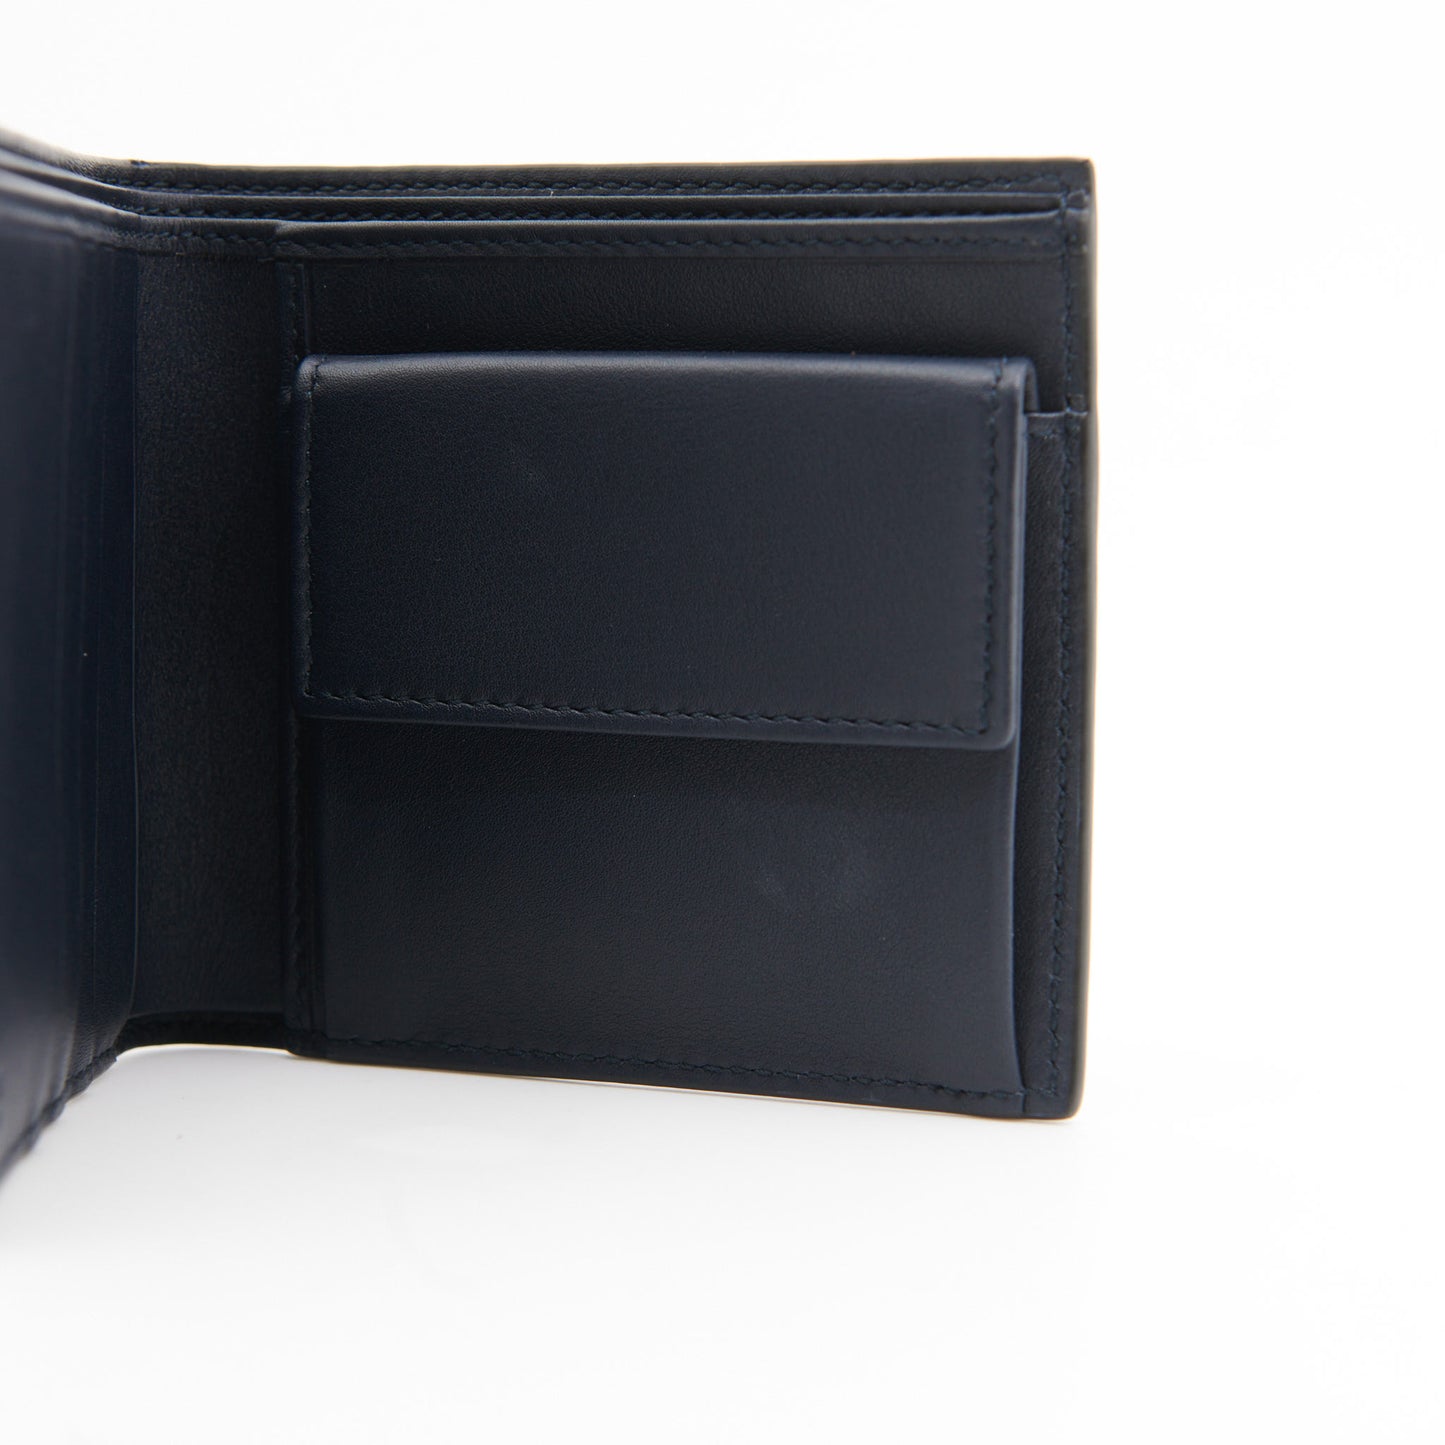 Gucci Leather Bi-Fold Wallet in Navy